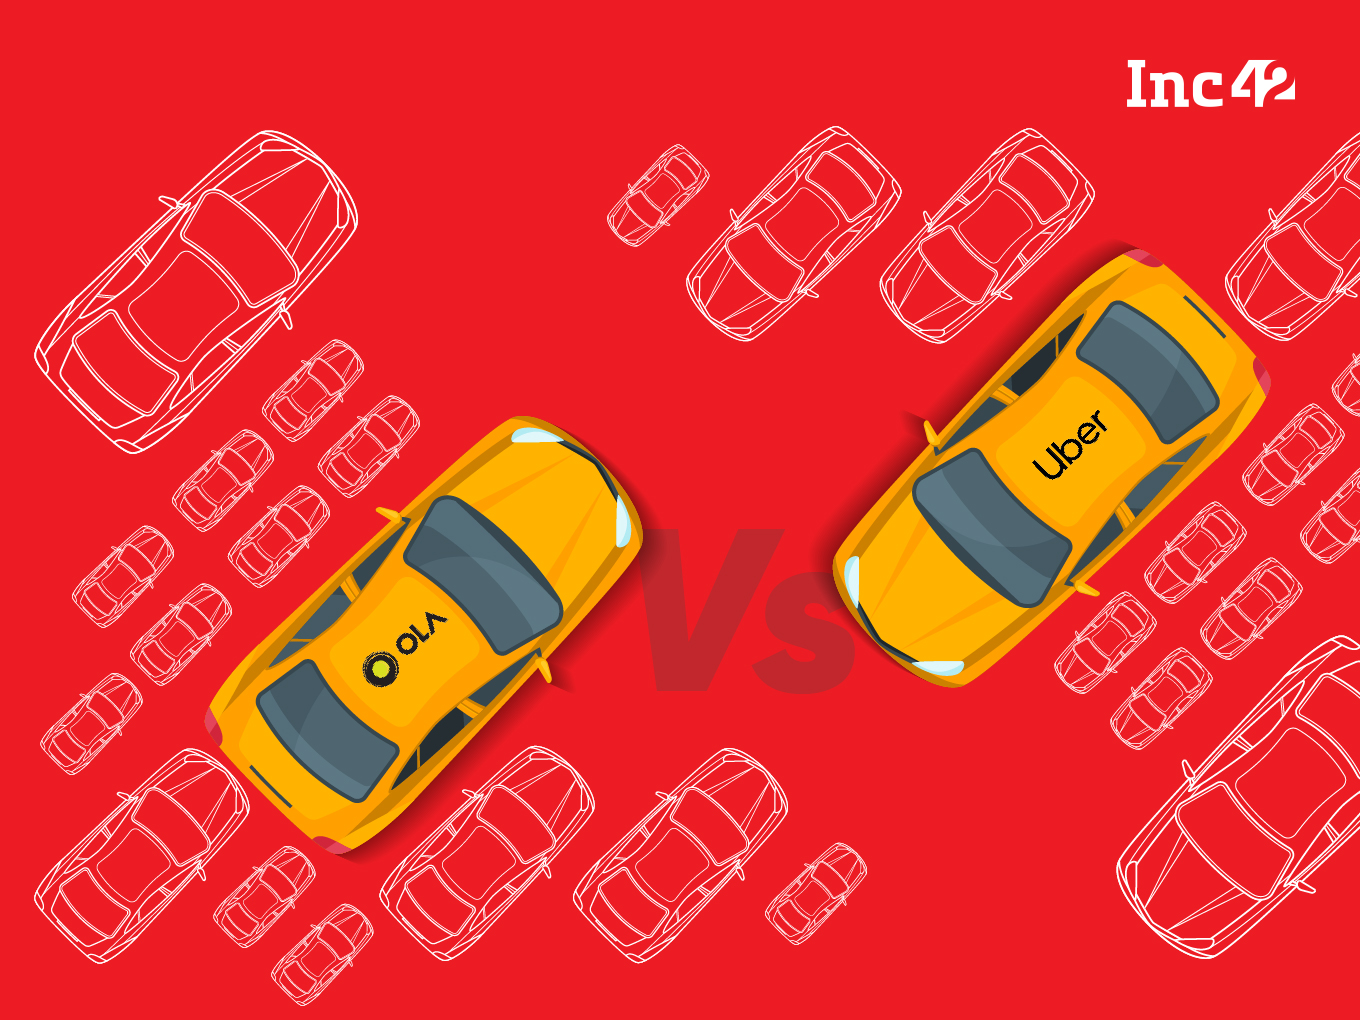 Cancelled Rides, Declining Service & Safety: How Do Ola & Uber Fare On Customer Experience?